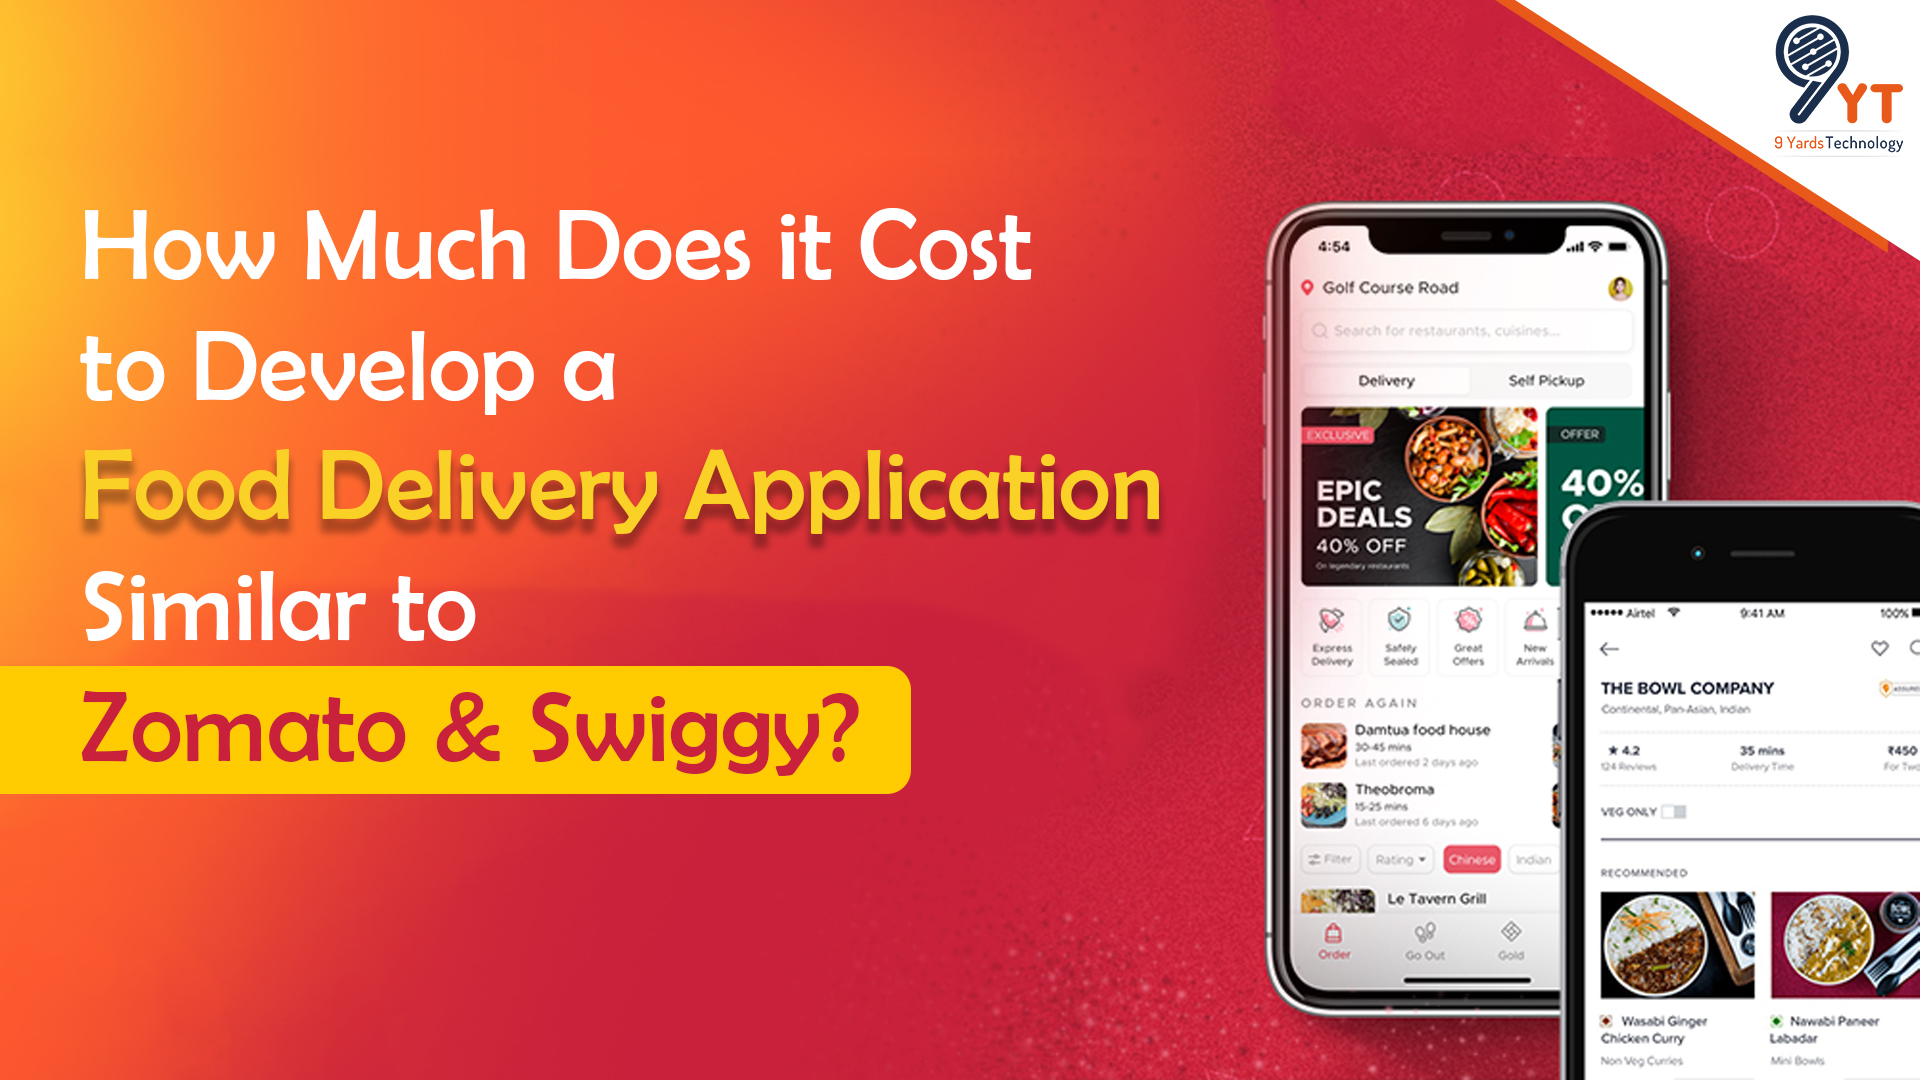 How Much Does it Cost to Develop a Food Delivery Application Similar to Zomato and Swiggy?